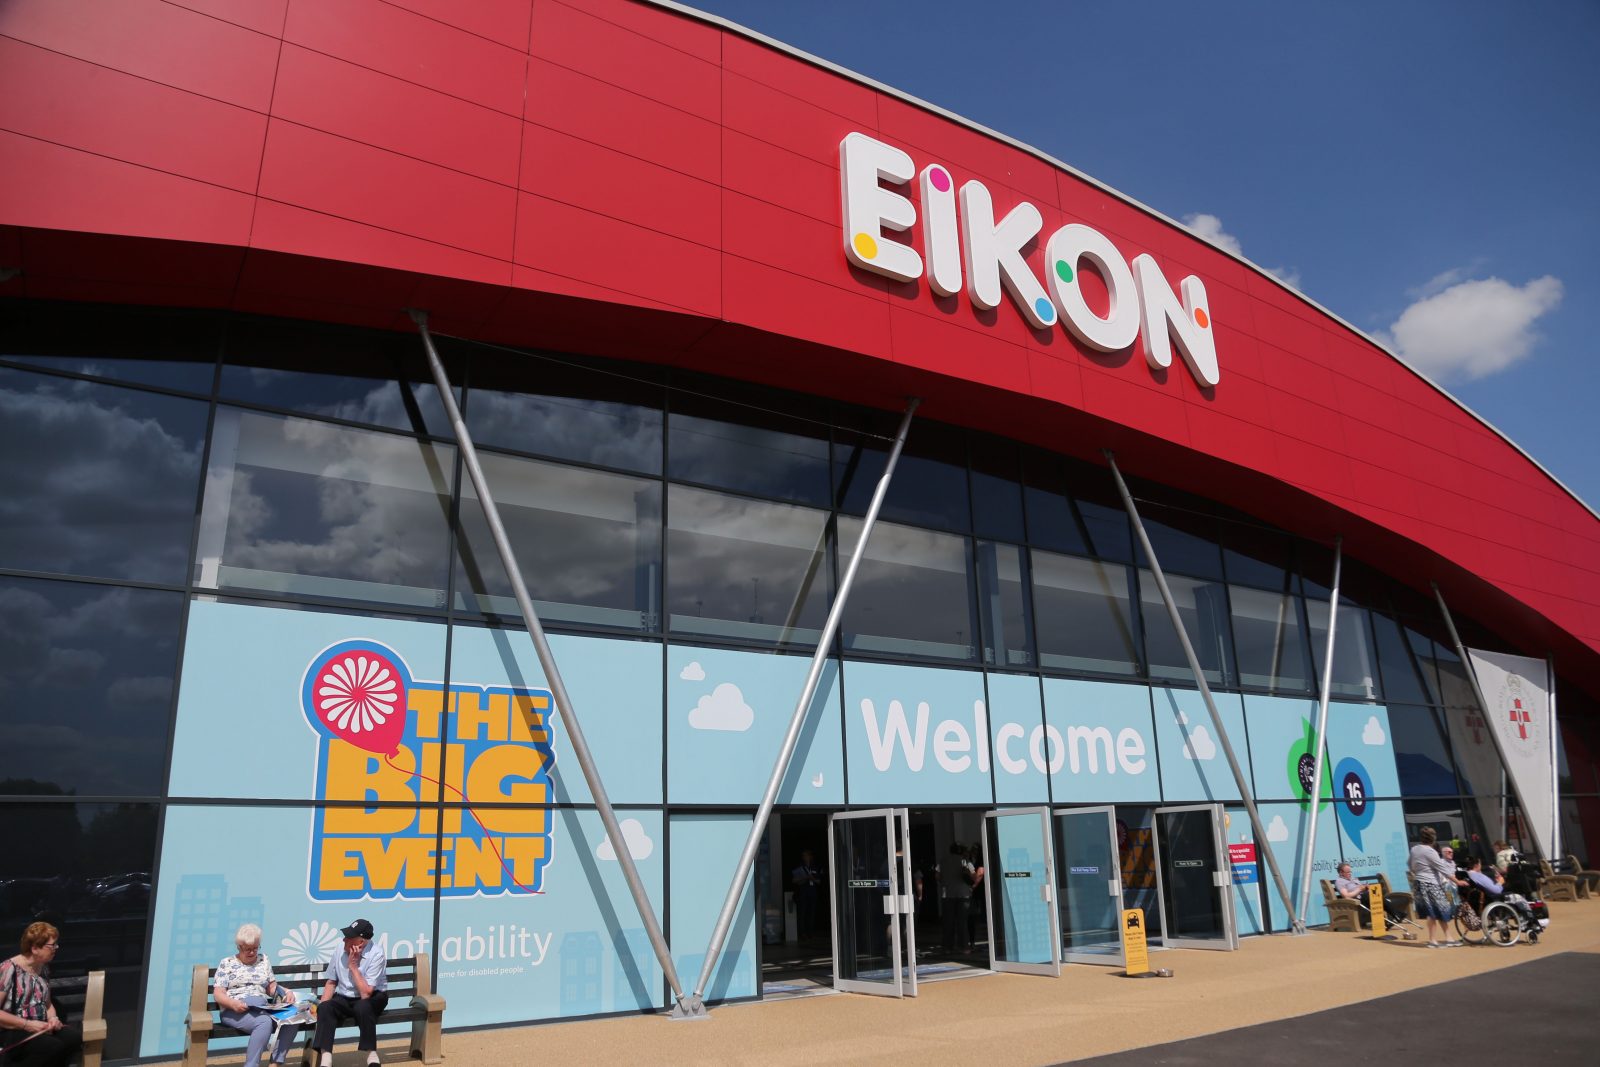 Eikon store from outside